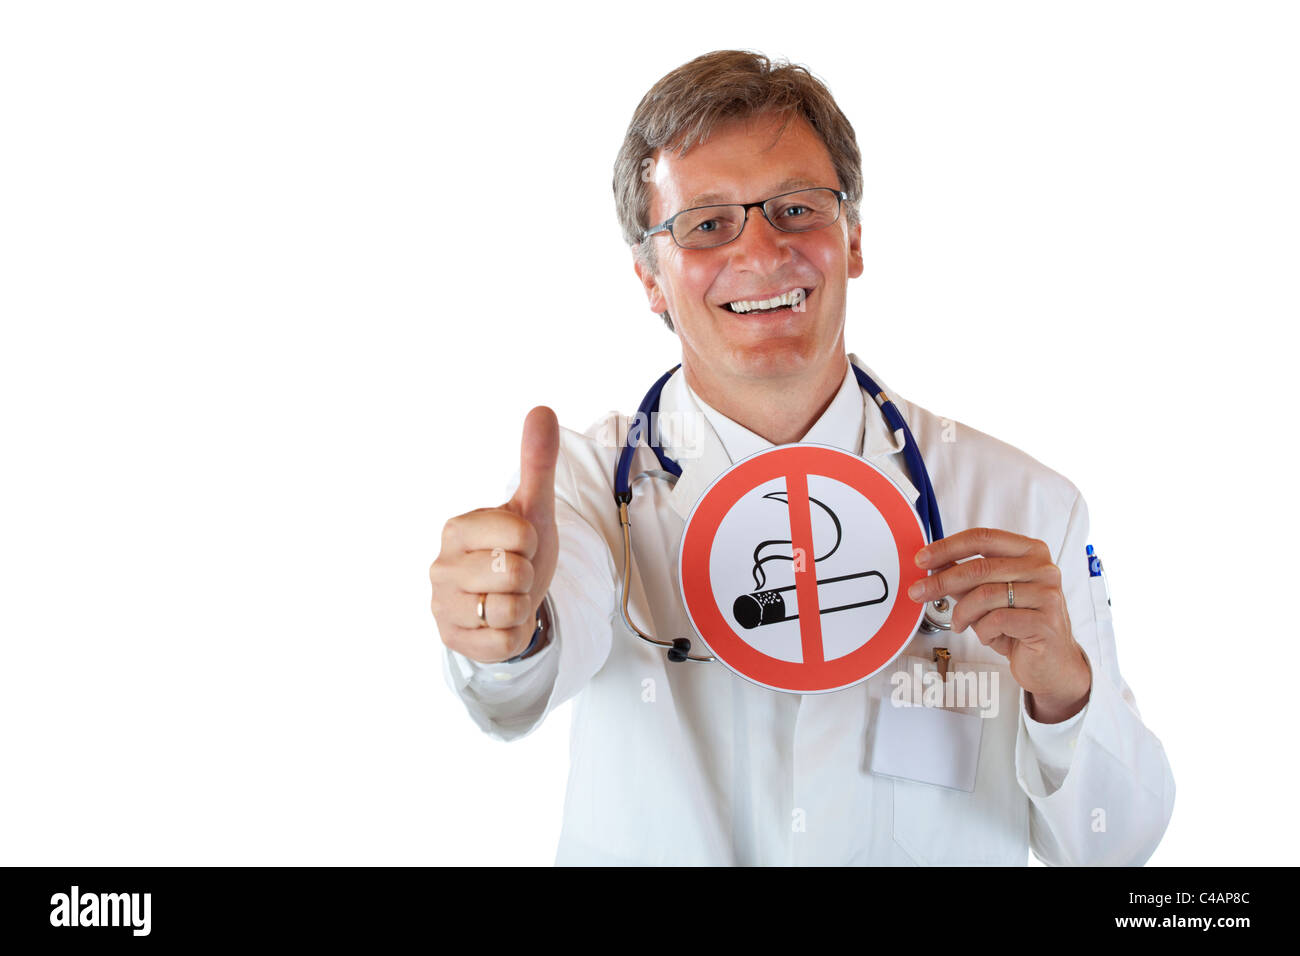 Happy smiling doctor holds smoking ban sign and shows thumb up. isolated on white background. Stock Photo